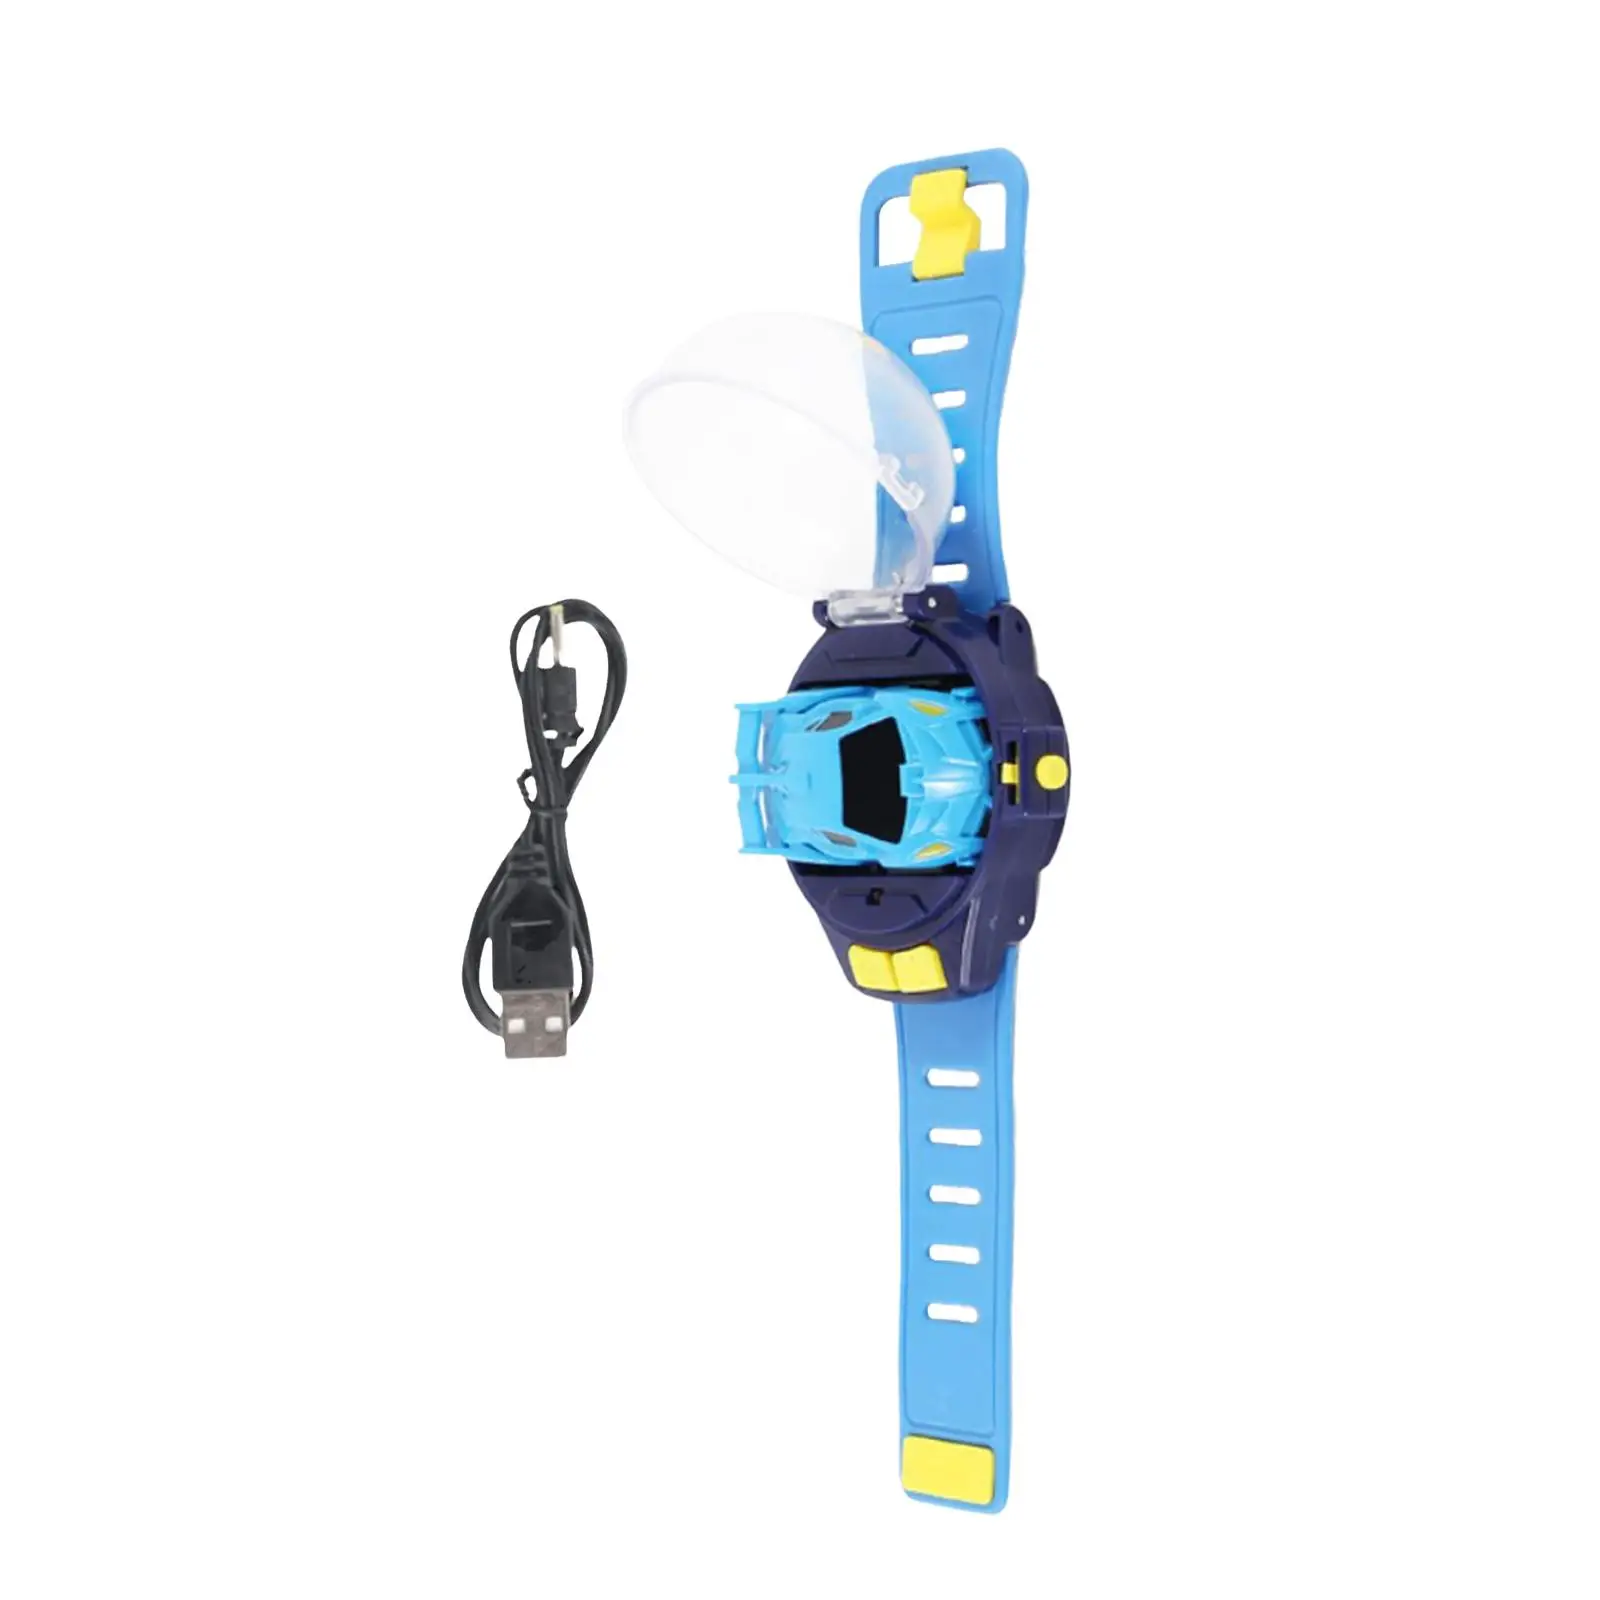 Cute Remote Controlled  Toy,USB Charging  Sensing  RC  Analog Watch